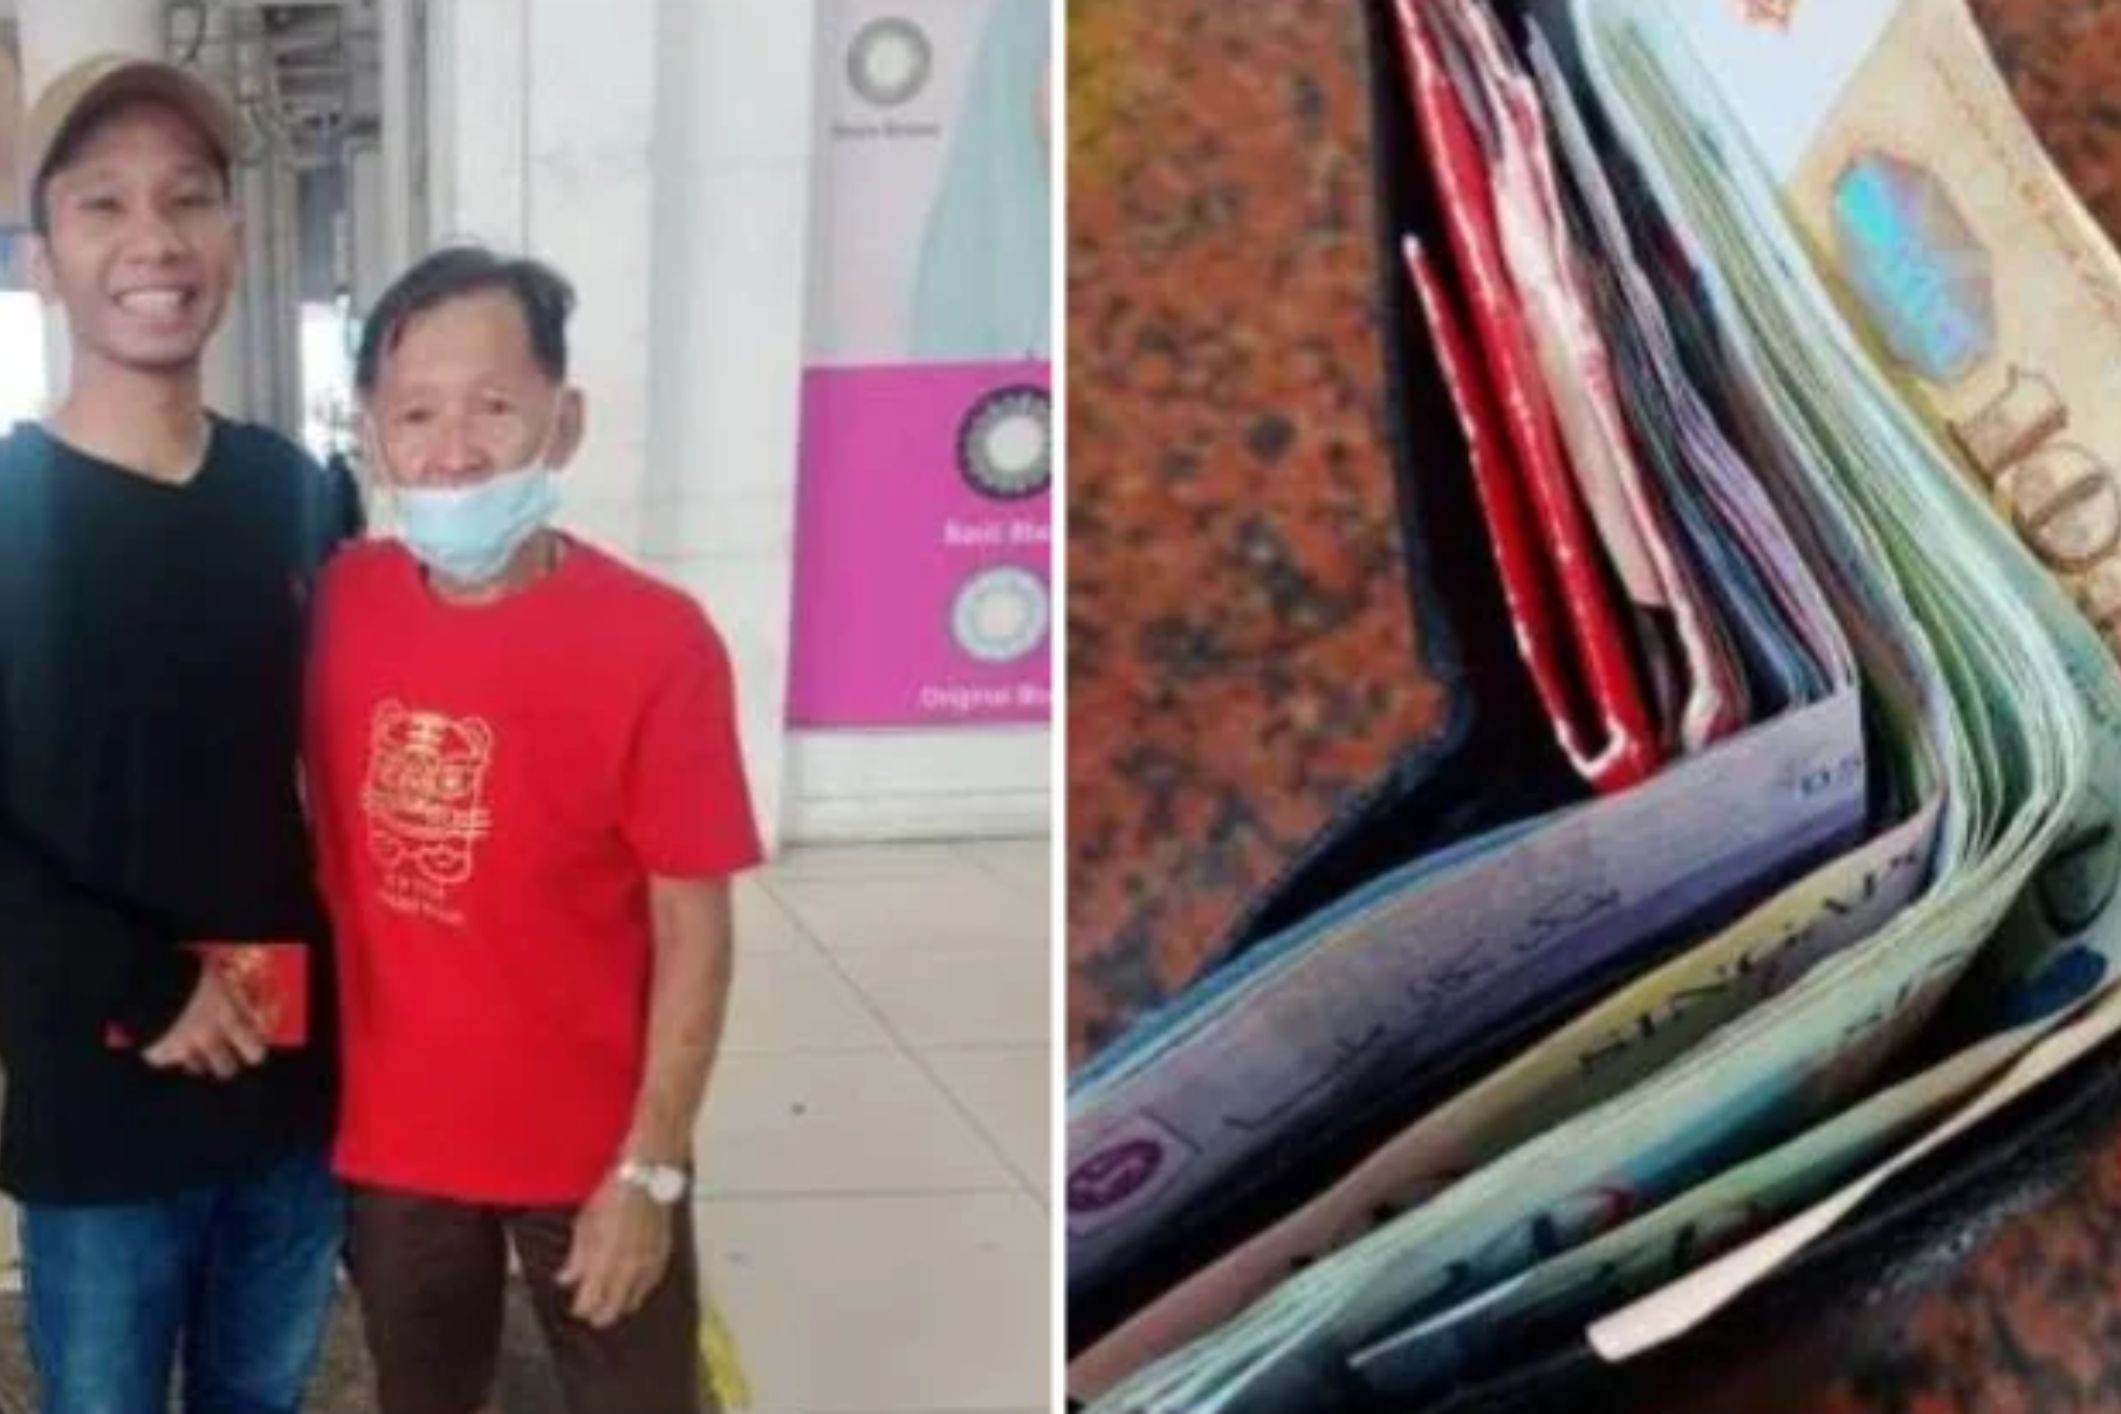 Elderly man moved to tears by kindness of teen as he returns lost wallet